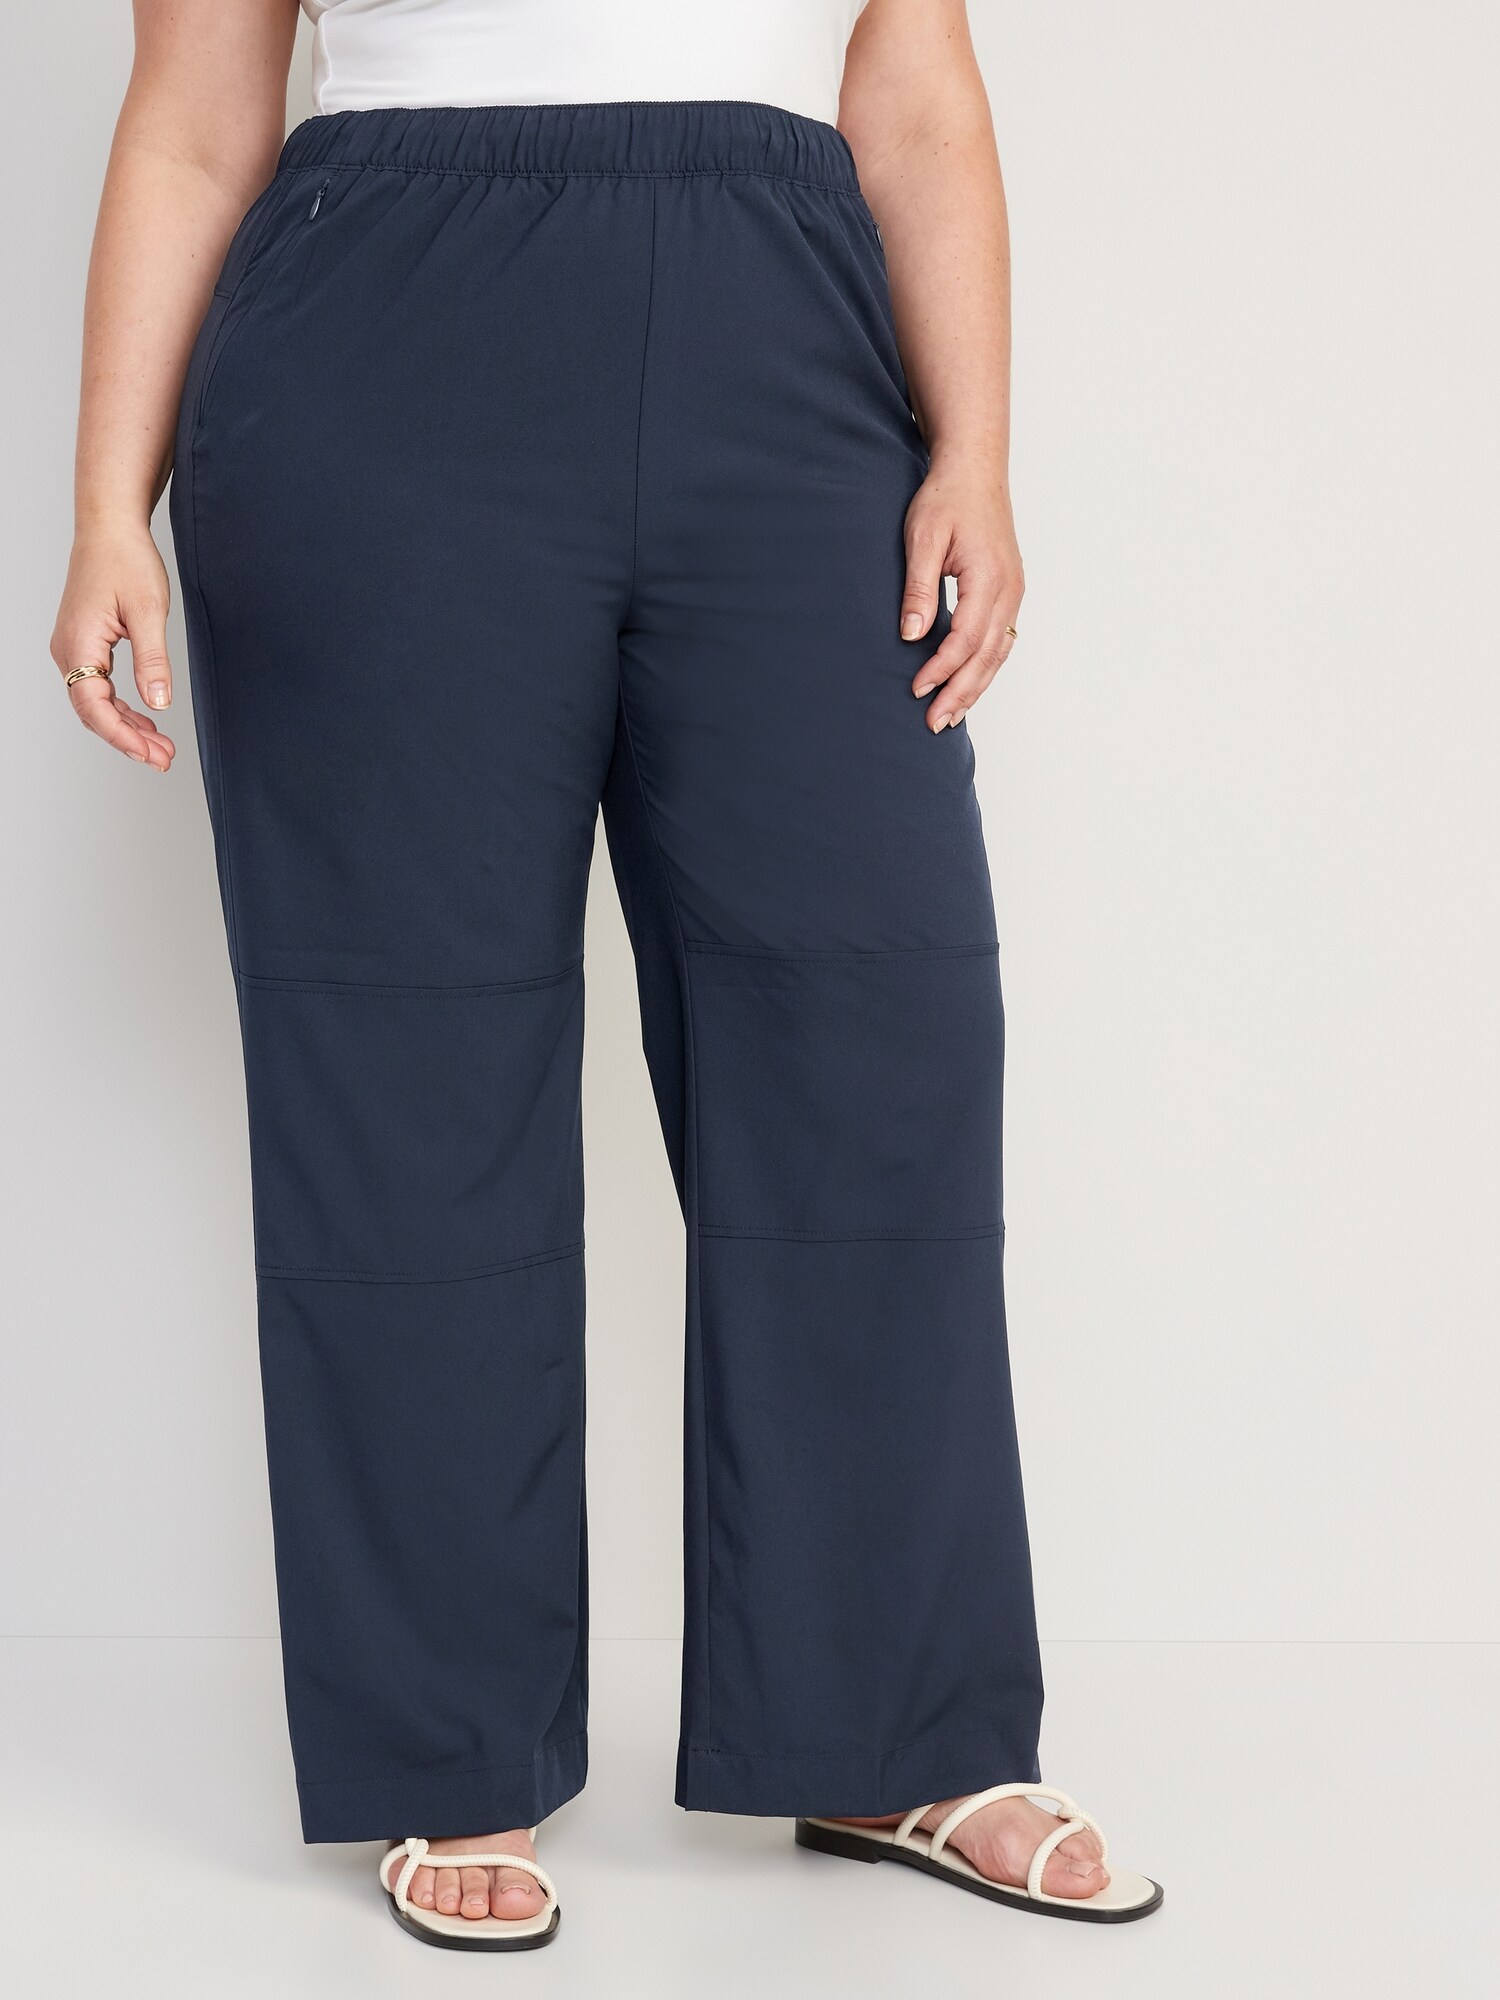 Old Navy - High-Waisted StretchTech Utility Crop Pants for Women